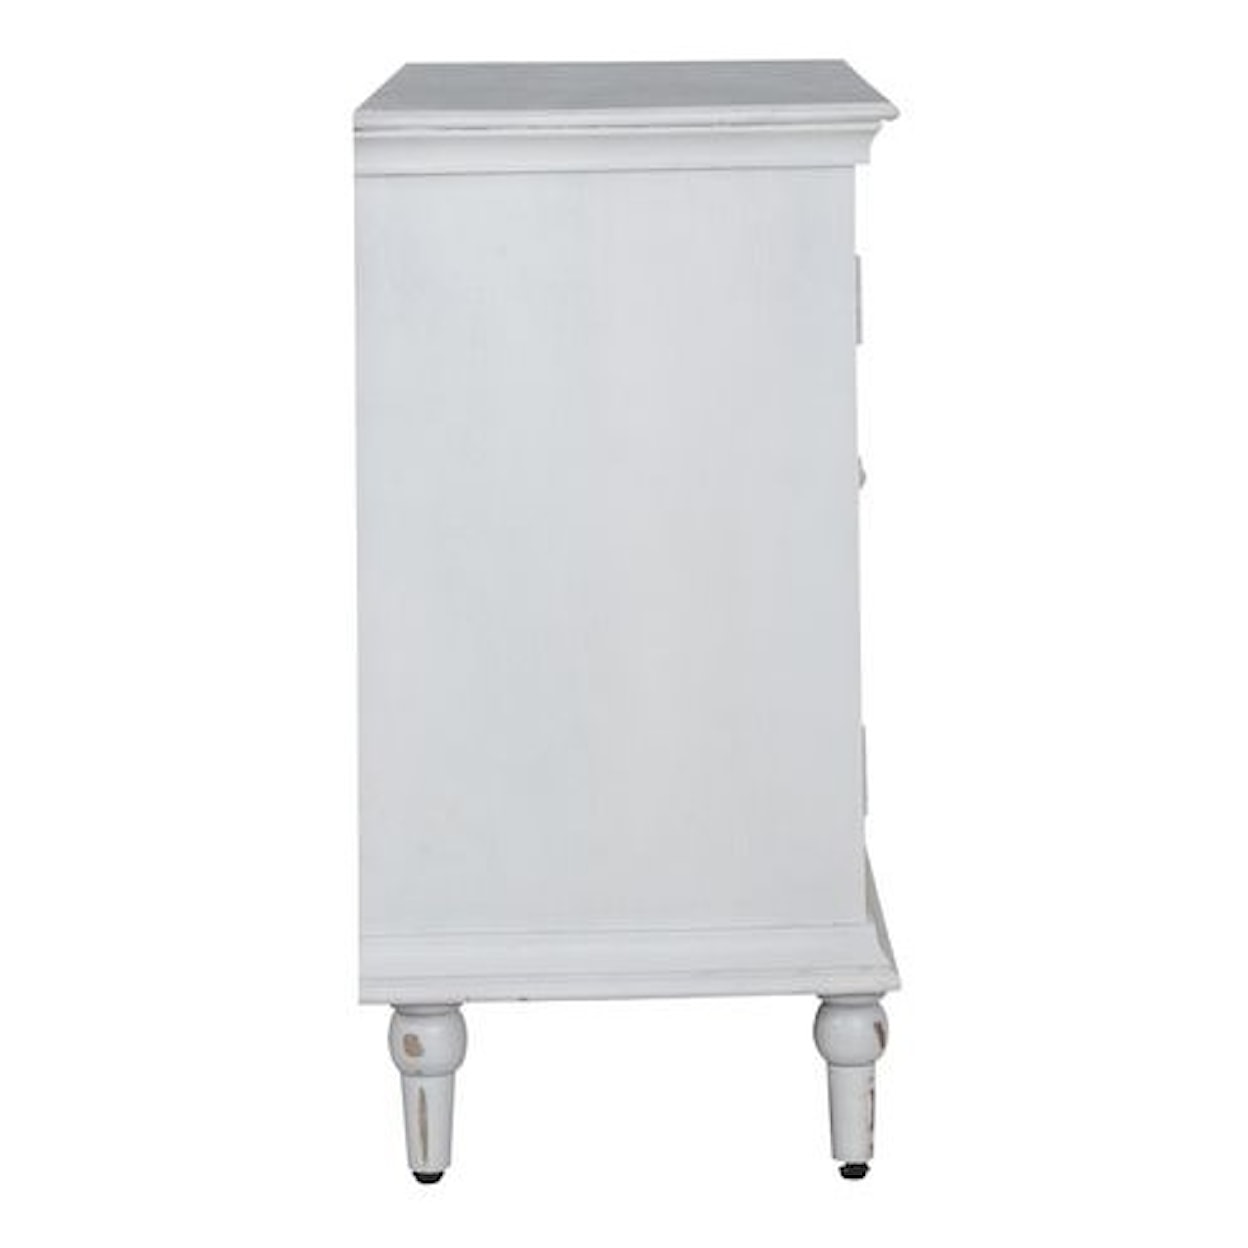 Libby French Quarter Two-Door Accent Cabinet